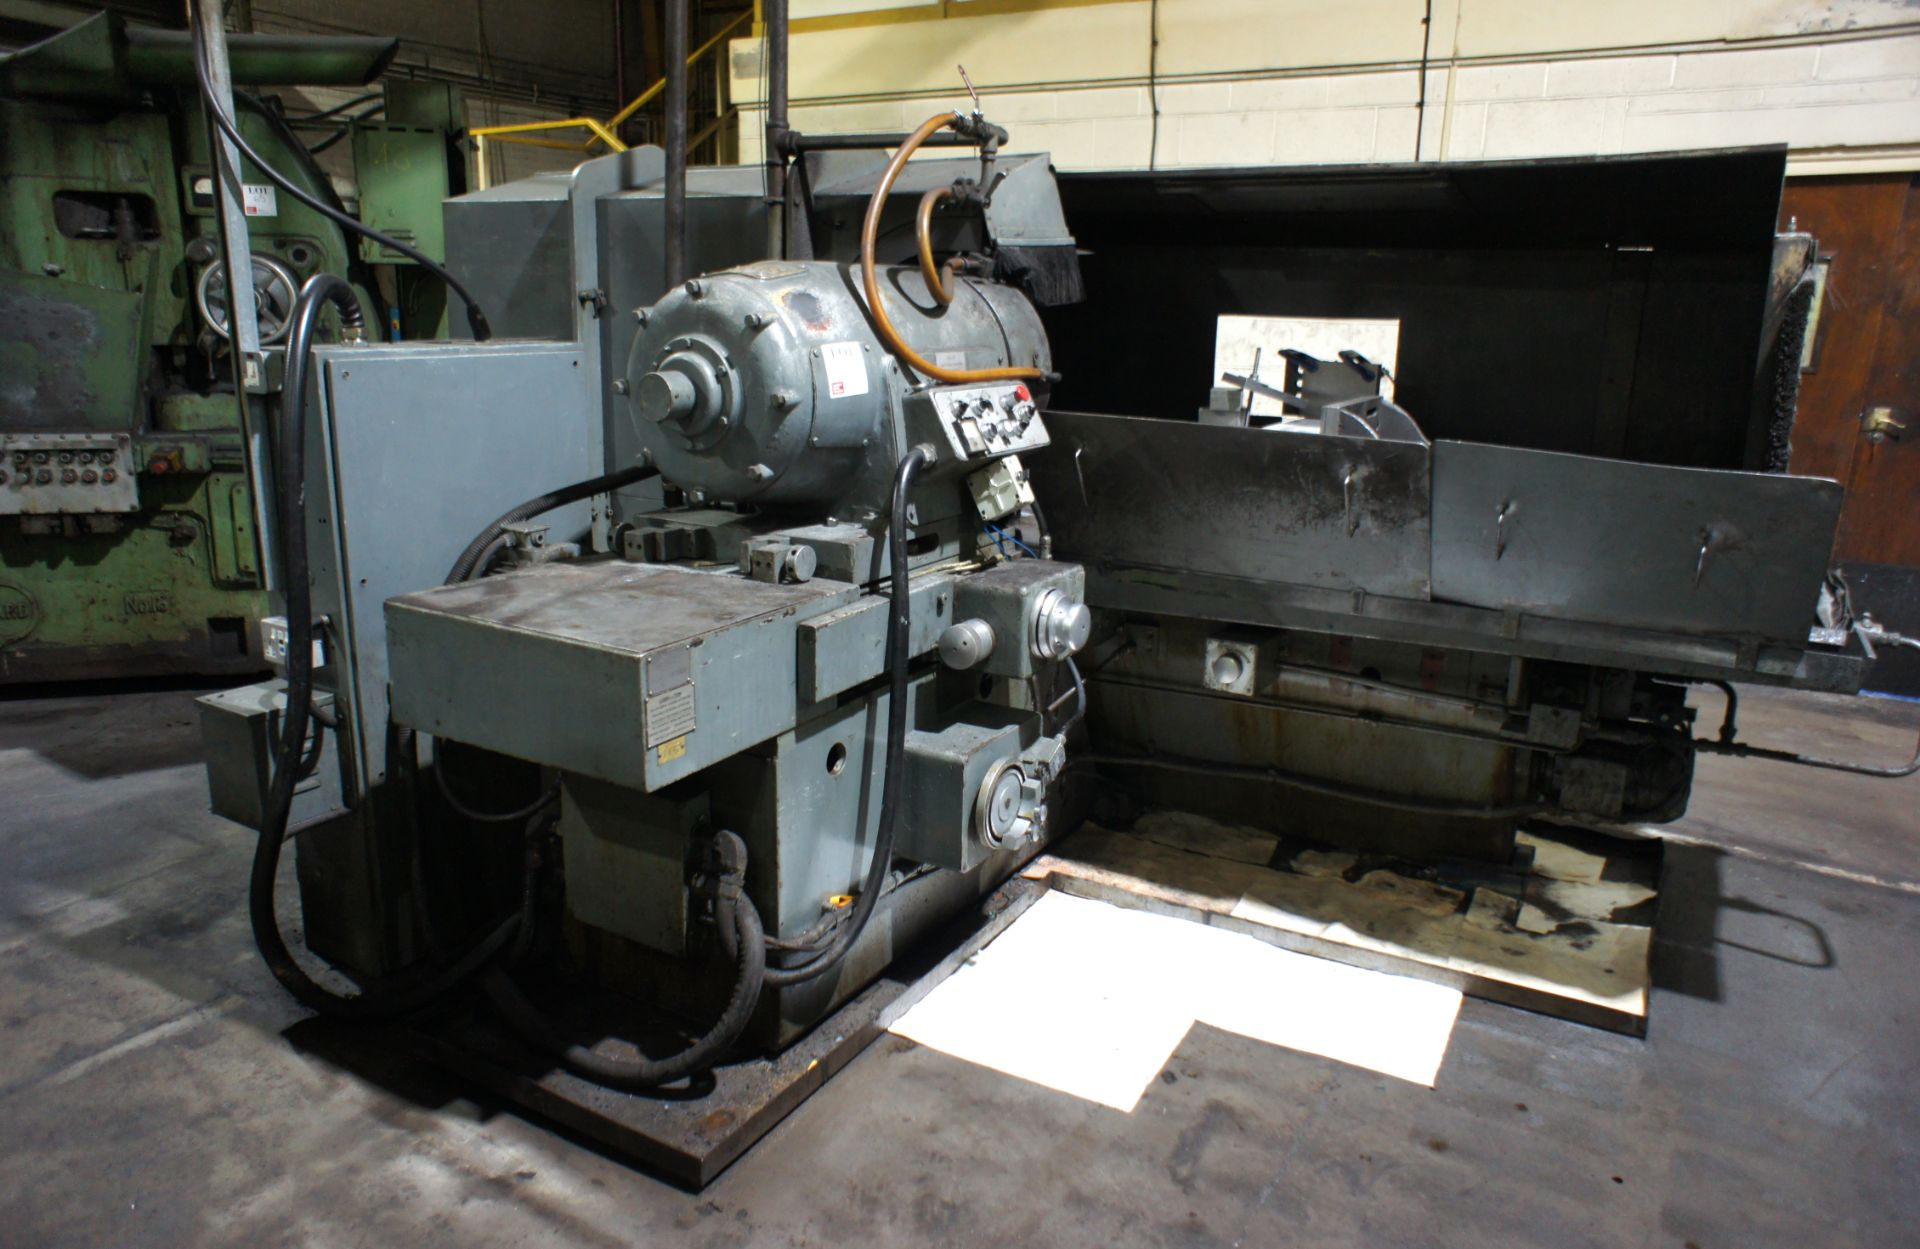 Snow G Type horizontal spindle, segmental grinder, Serial no. 8373, slotted bed 1000mm x 450mm (